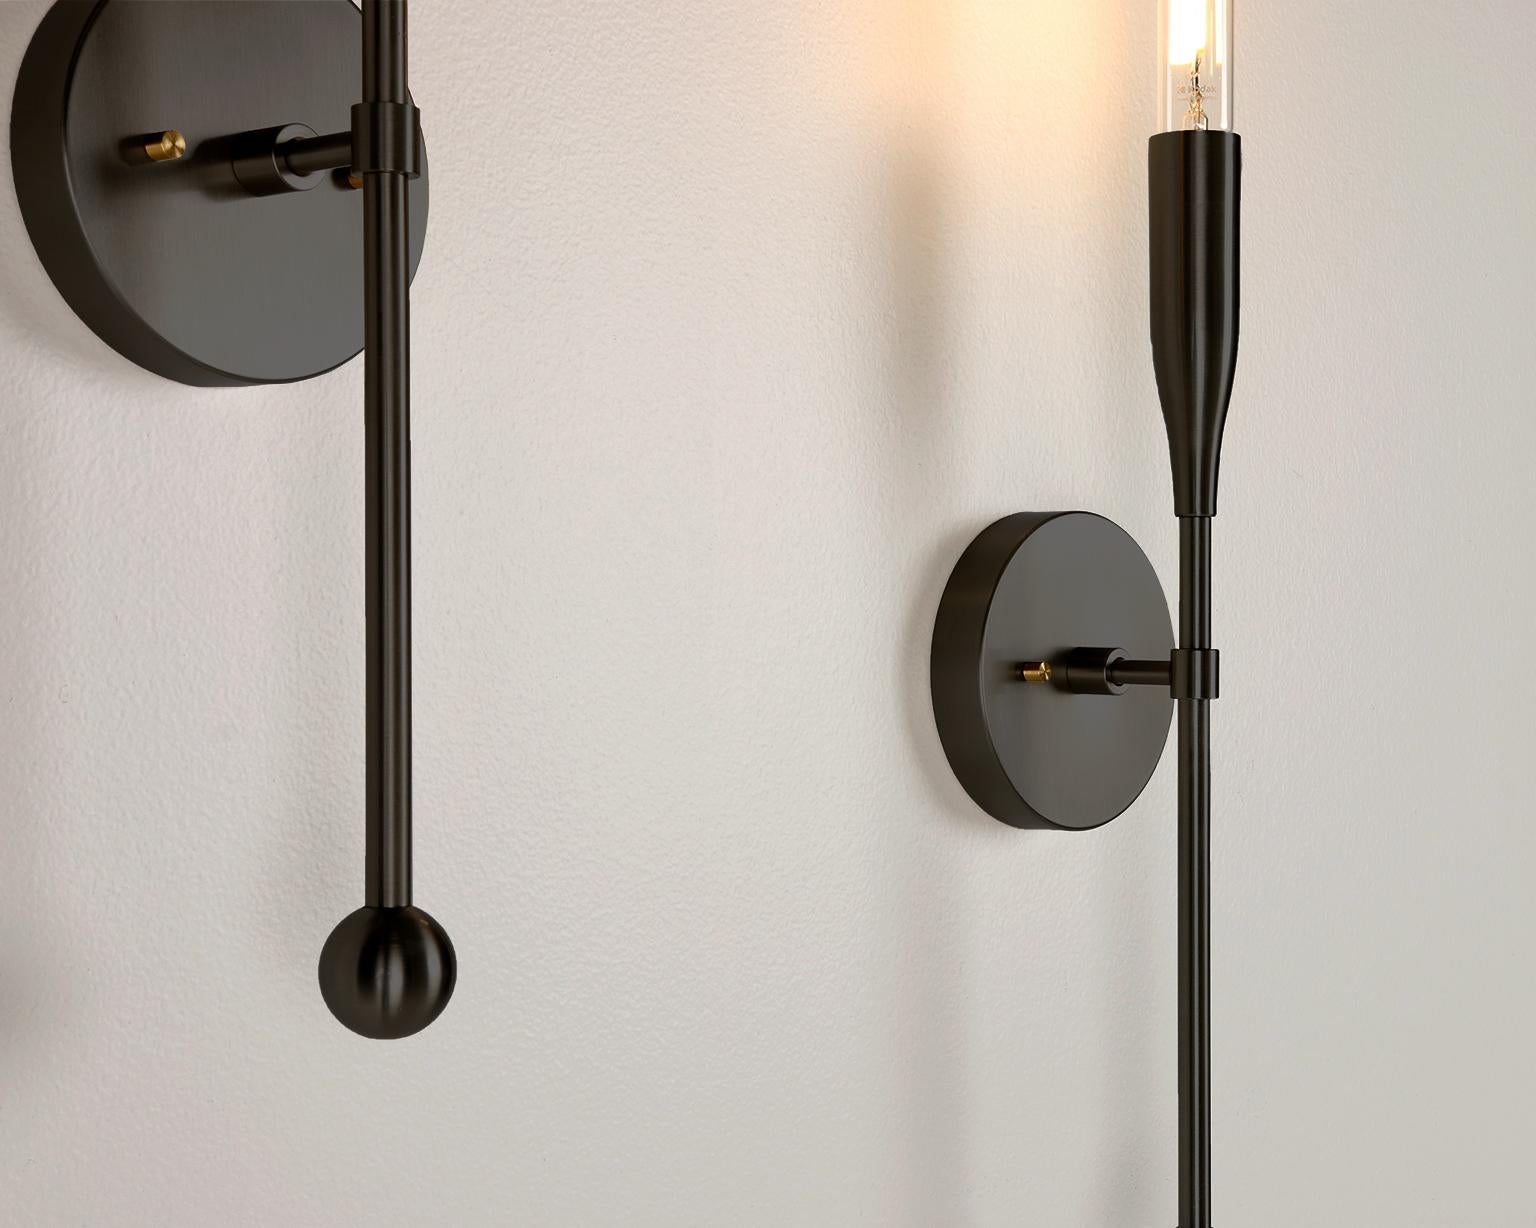 Our midcentury-inspired linear wall sconce is minimal and sophisticated. The fluted lines of this contemporary light fixture create a versatile choice for accent or task lighting. With an exposed bulb, sweeping curves, and clean lines, the design